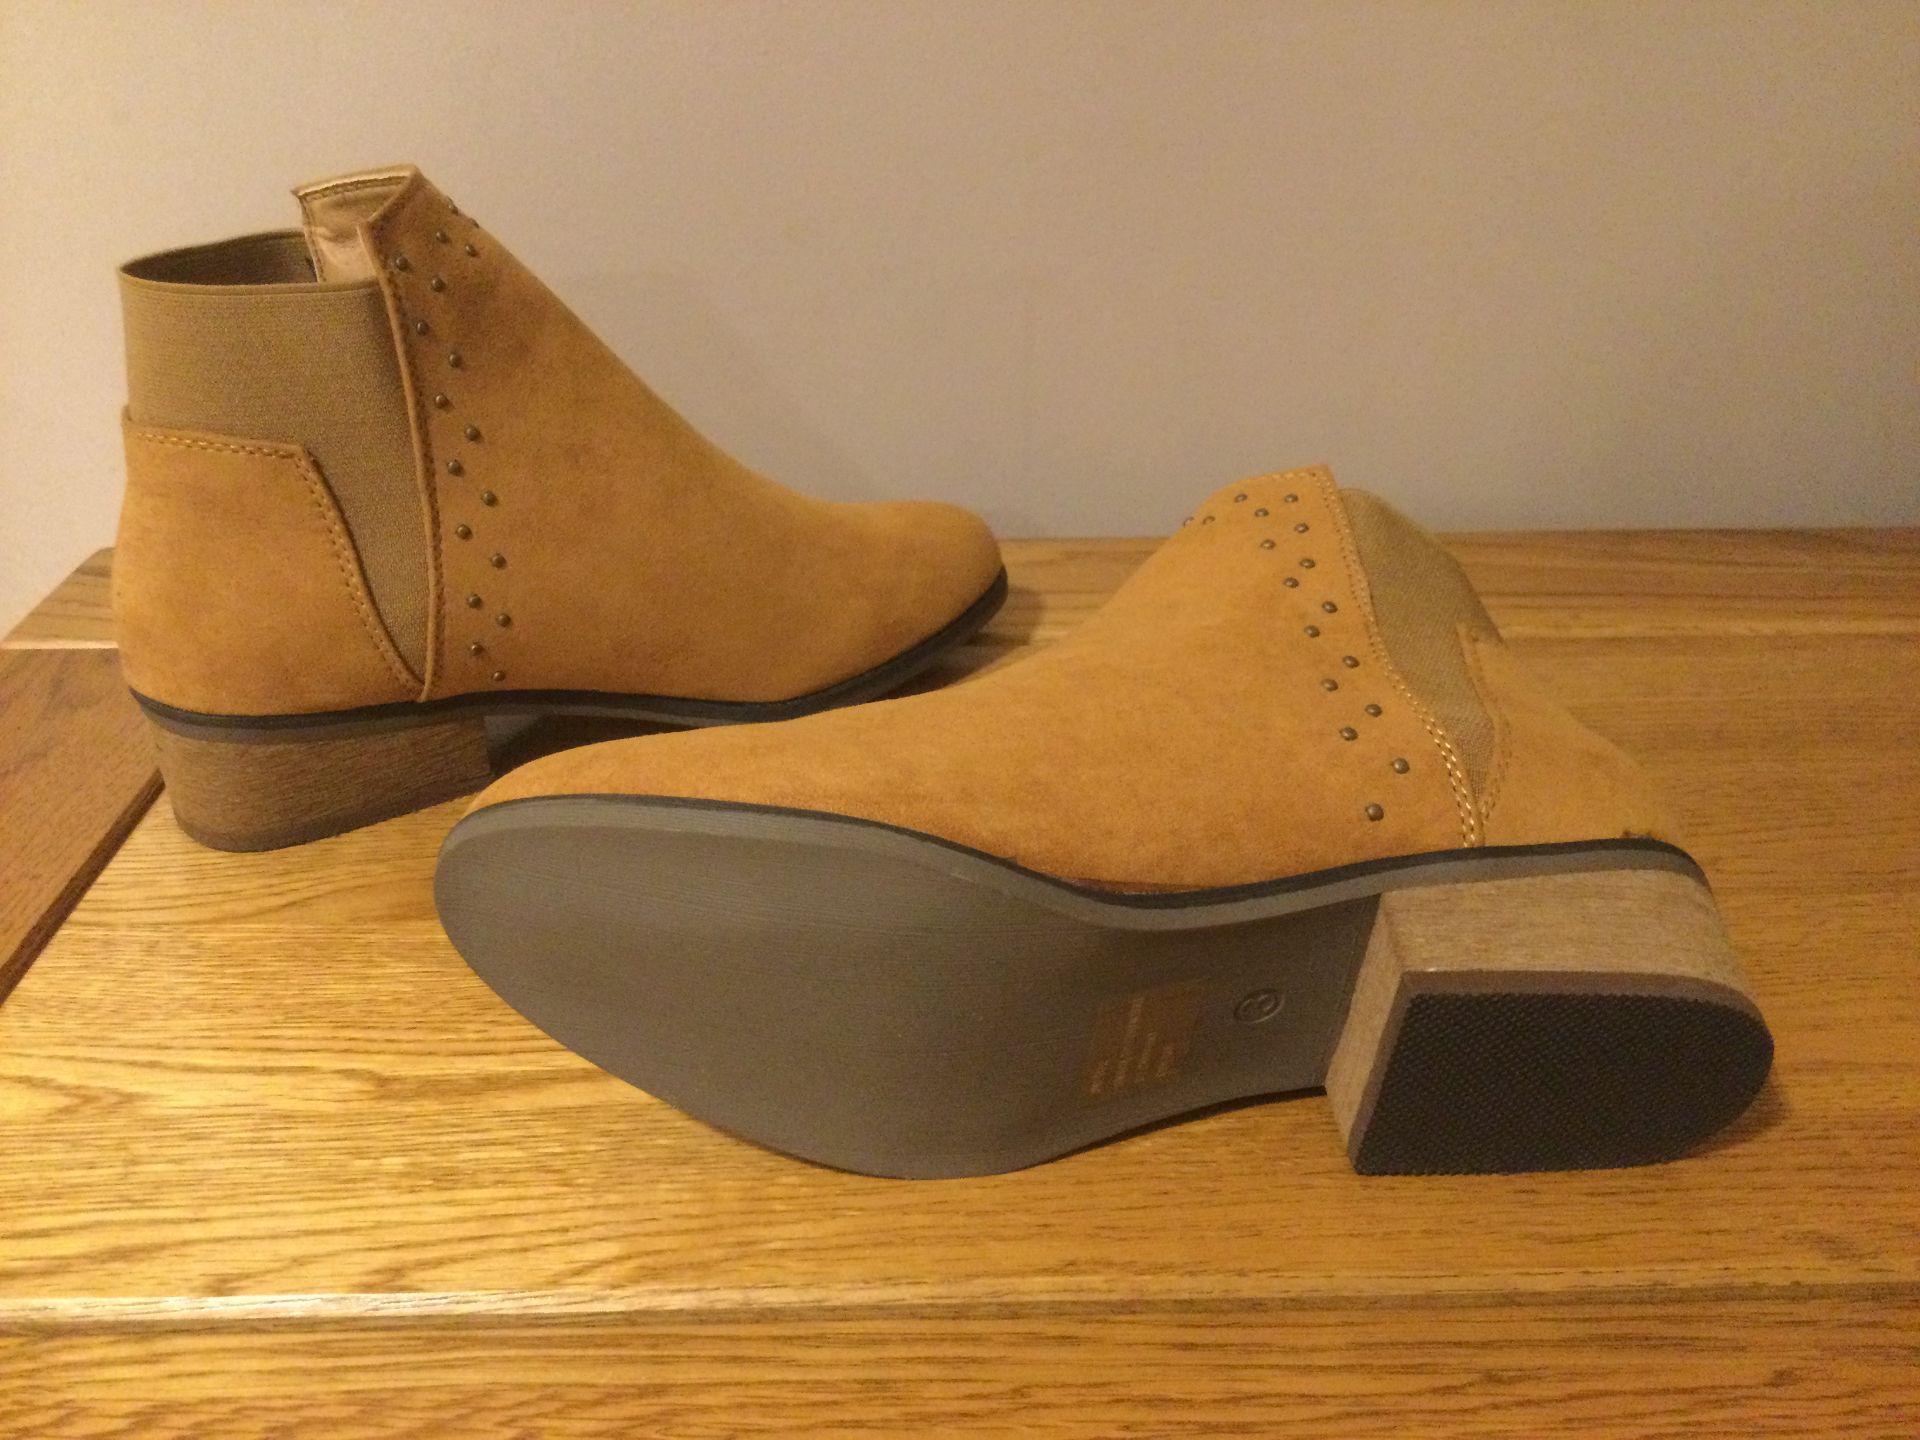 Dolcis “Wendy” Low Heel Ankle Boots, Size 3, Tan - New RRP £45.99 - Image 5 of 7